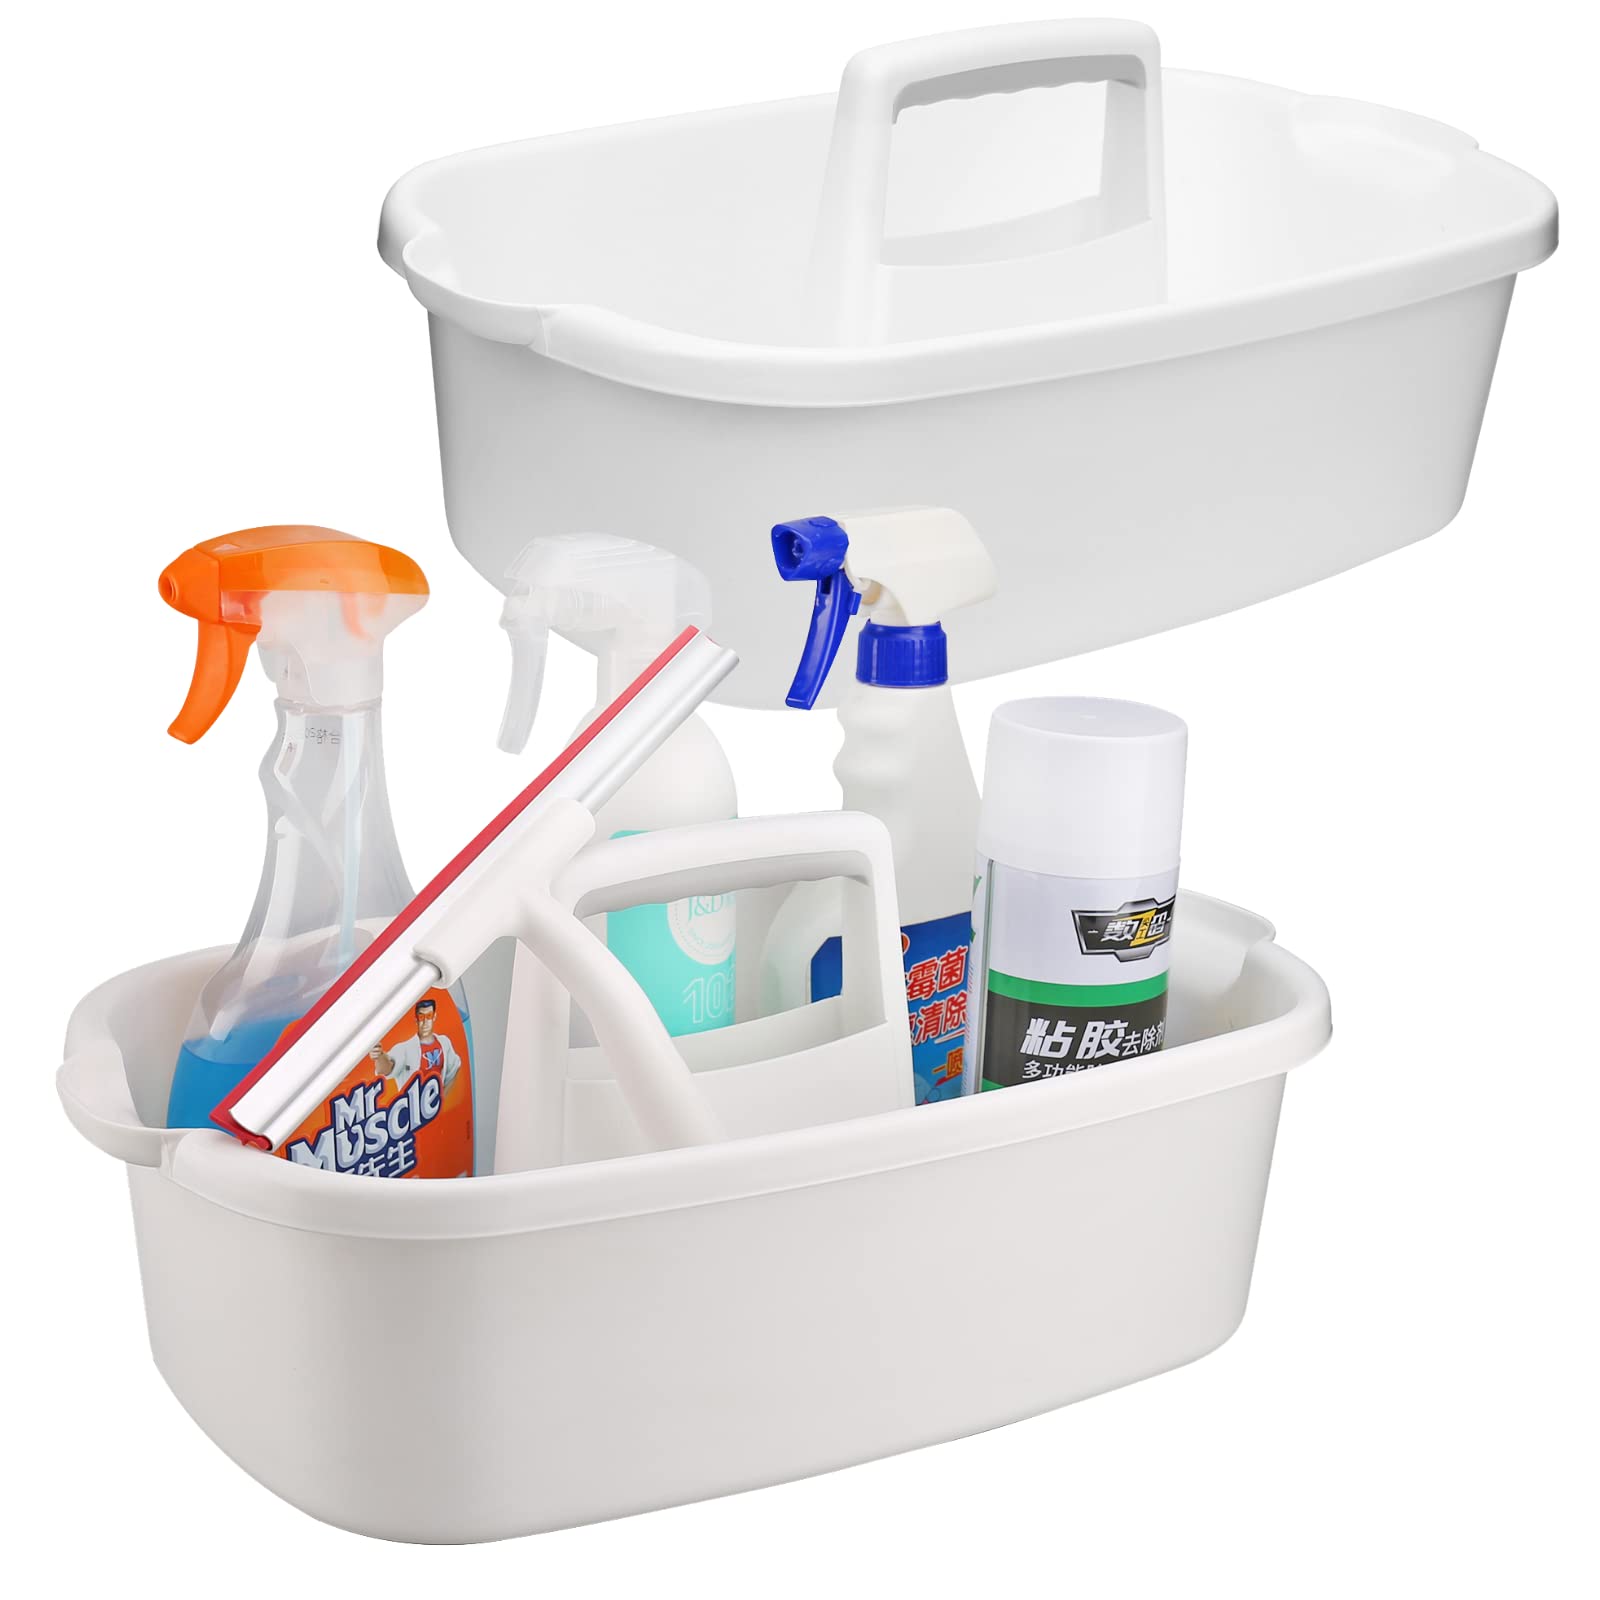 KeFanta Cleaning Caddy Organizer With Handle, White Plastic